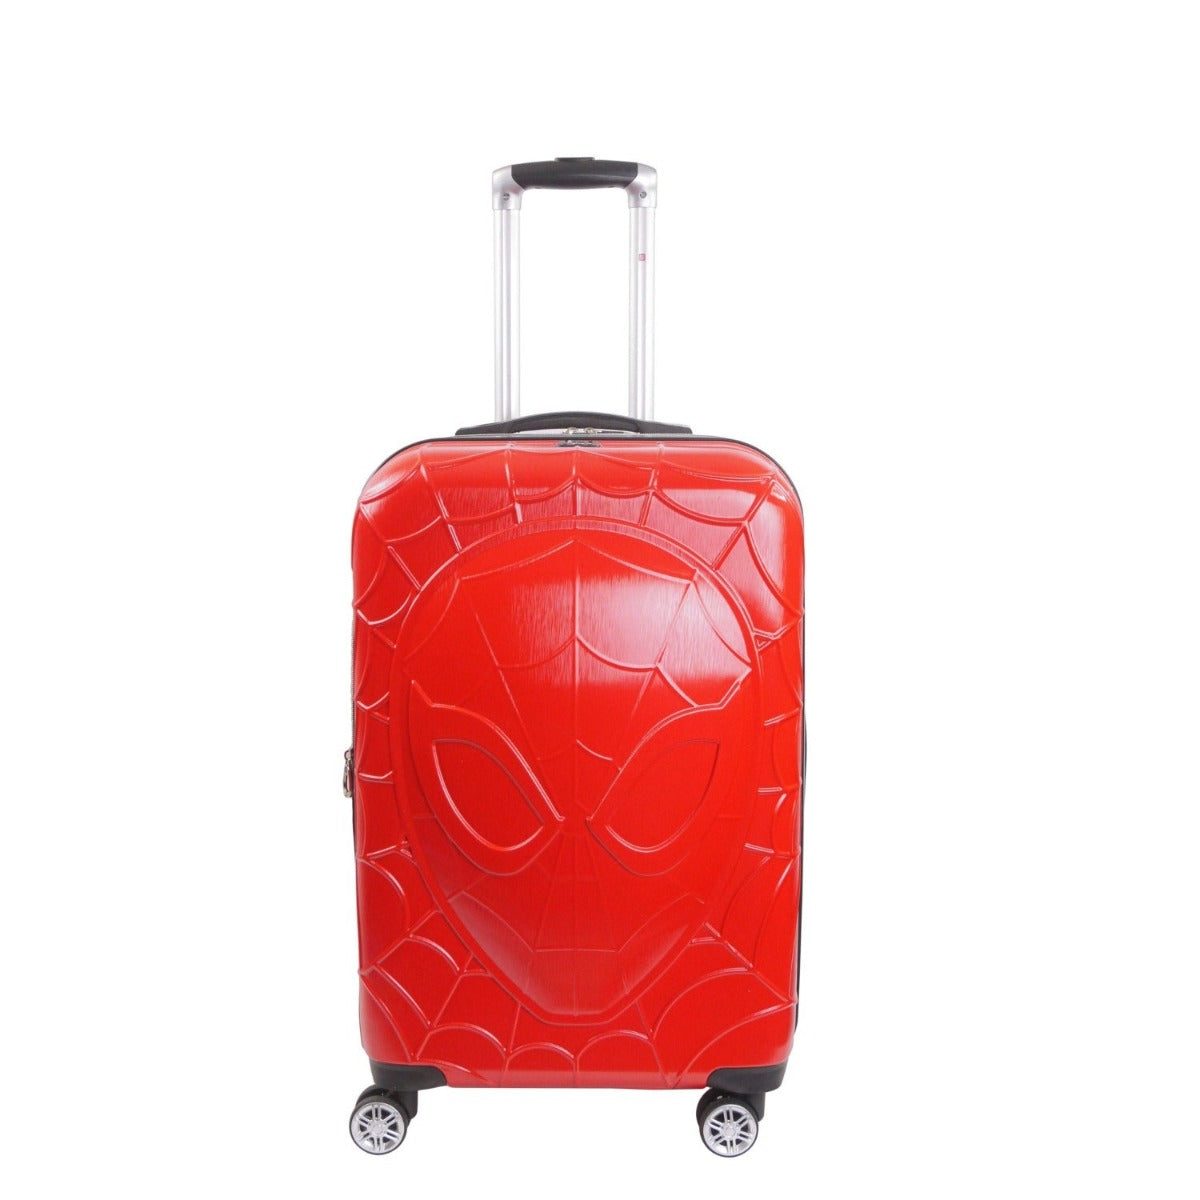 Marvel Spiderman 25" Expandable Hard-sided Spinner Suitcase Luggage Red